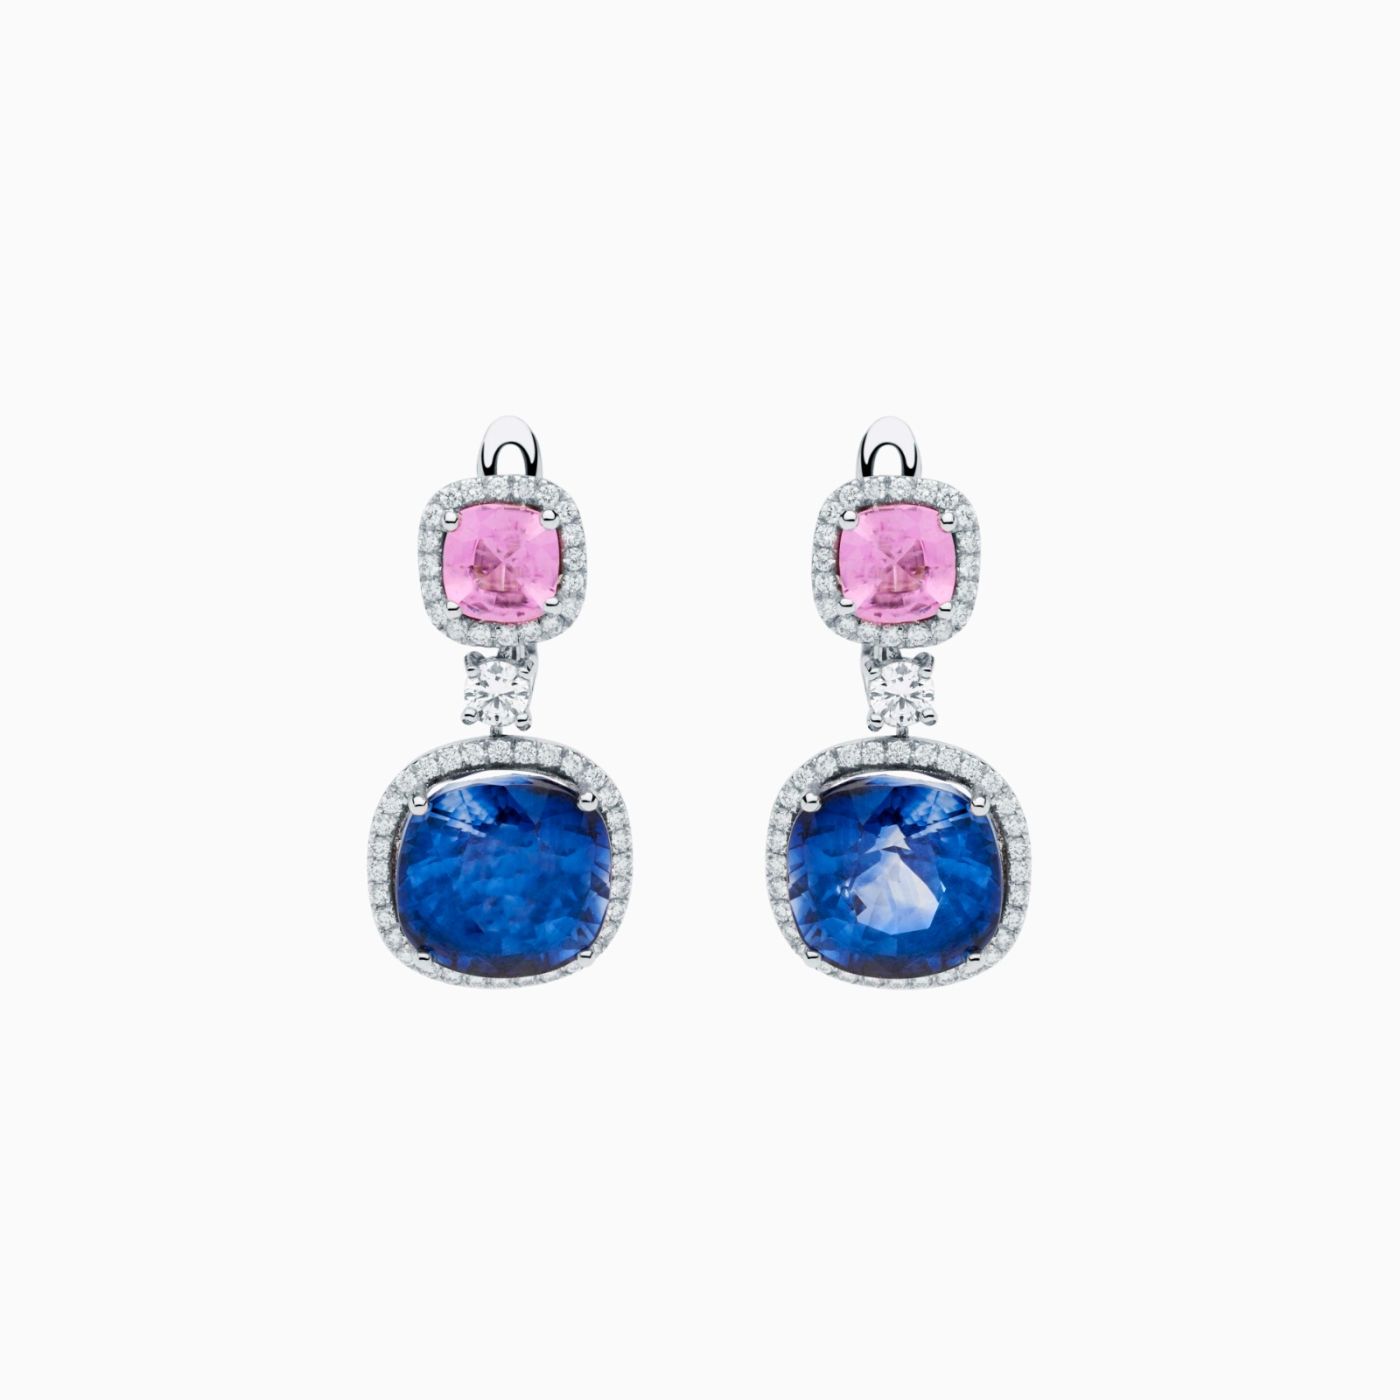 White gold earrings with blue sapphiros and pink sapphires